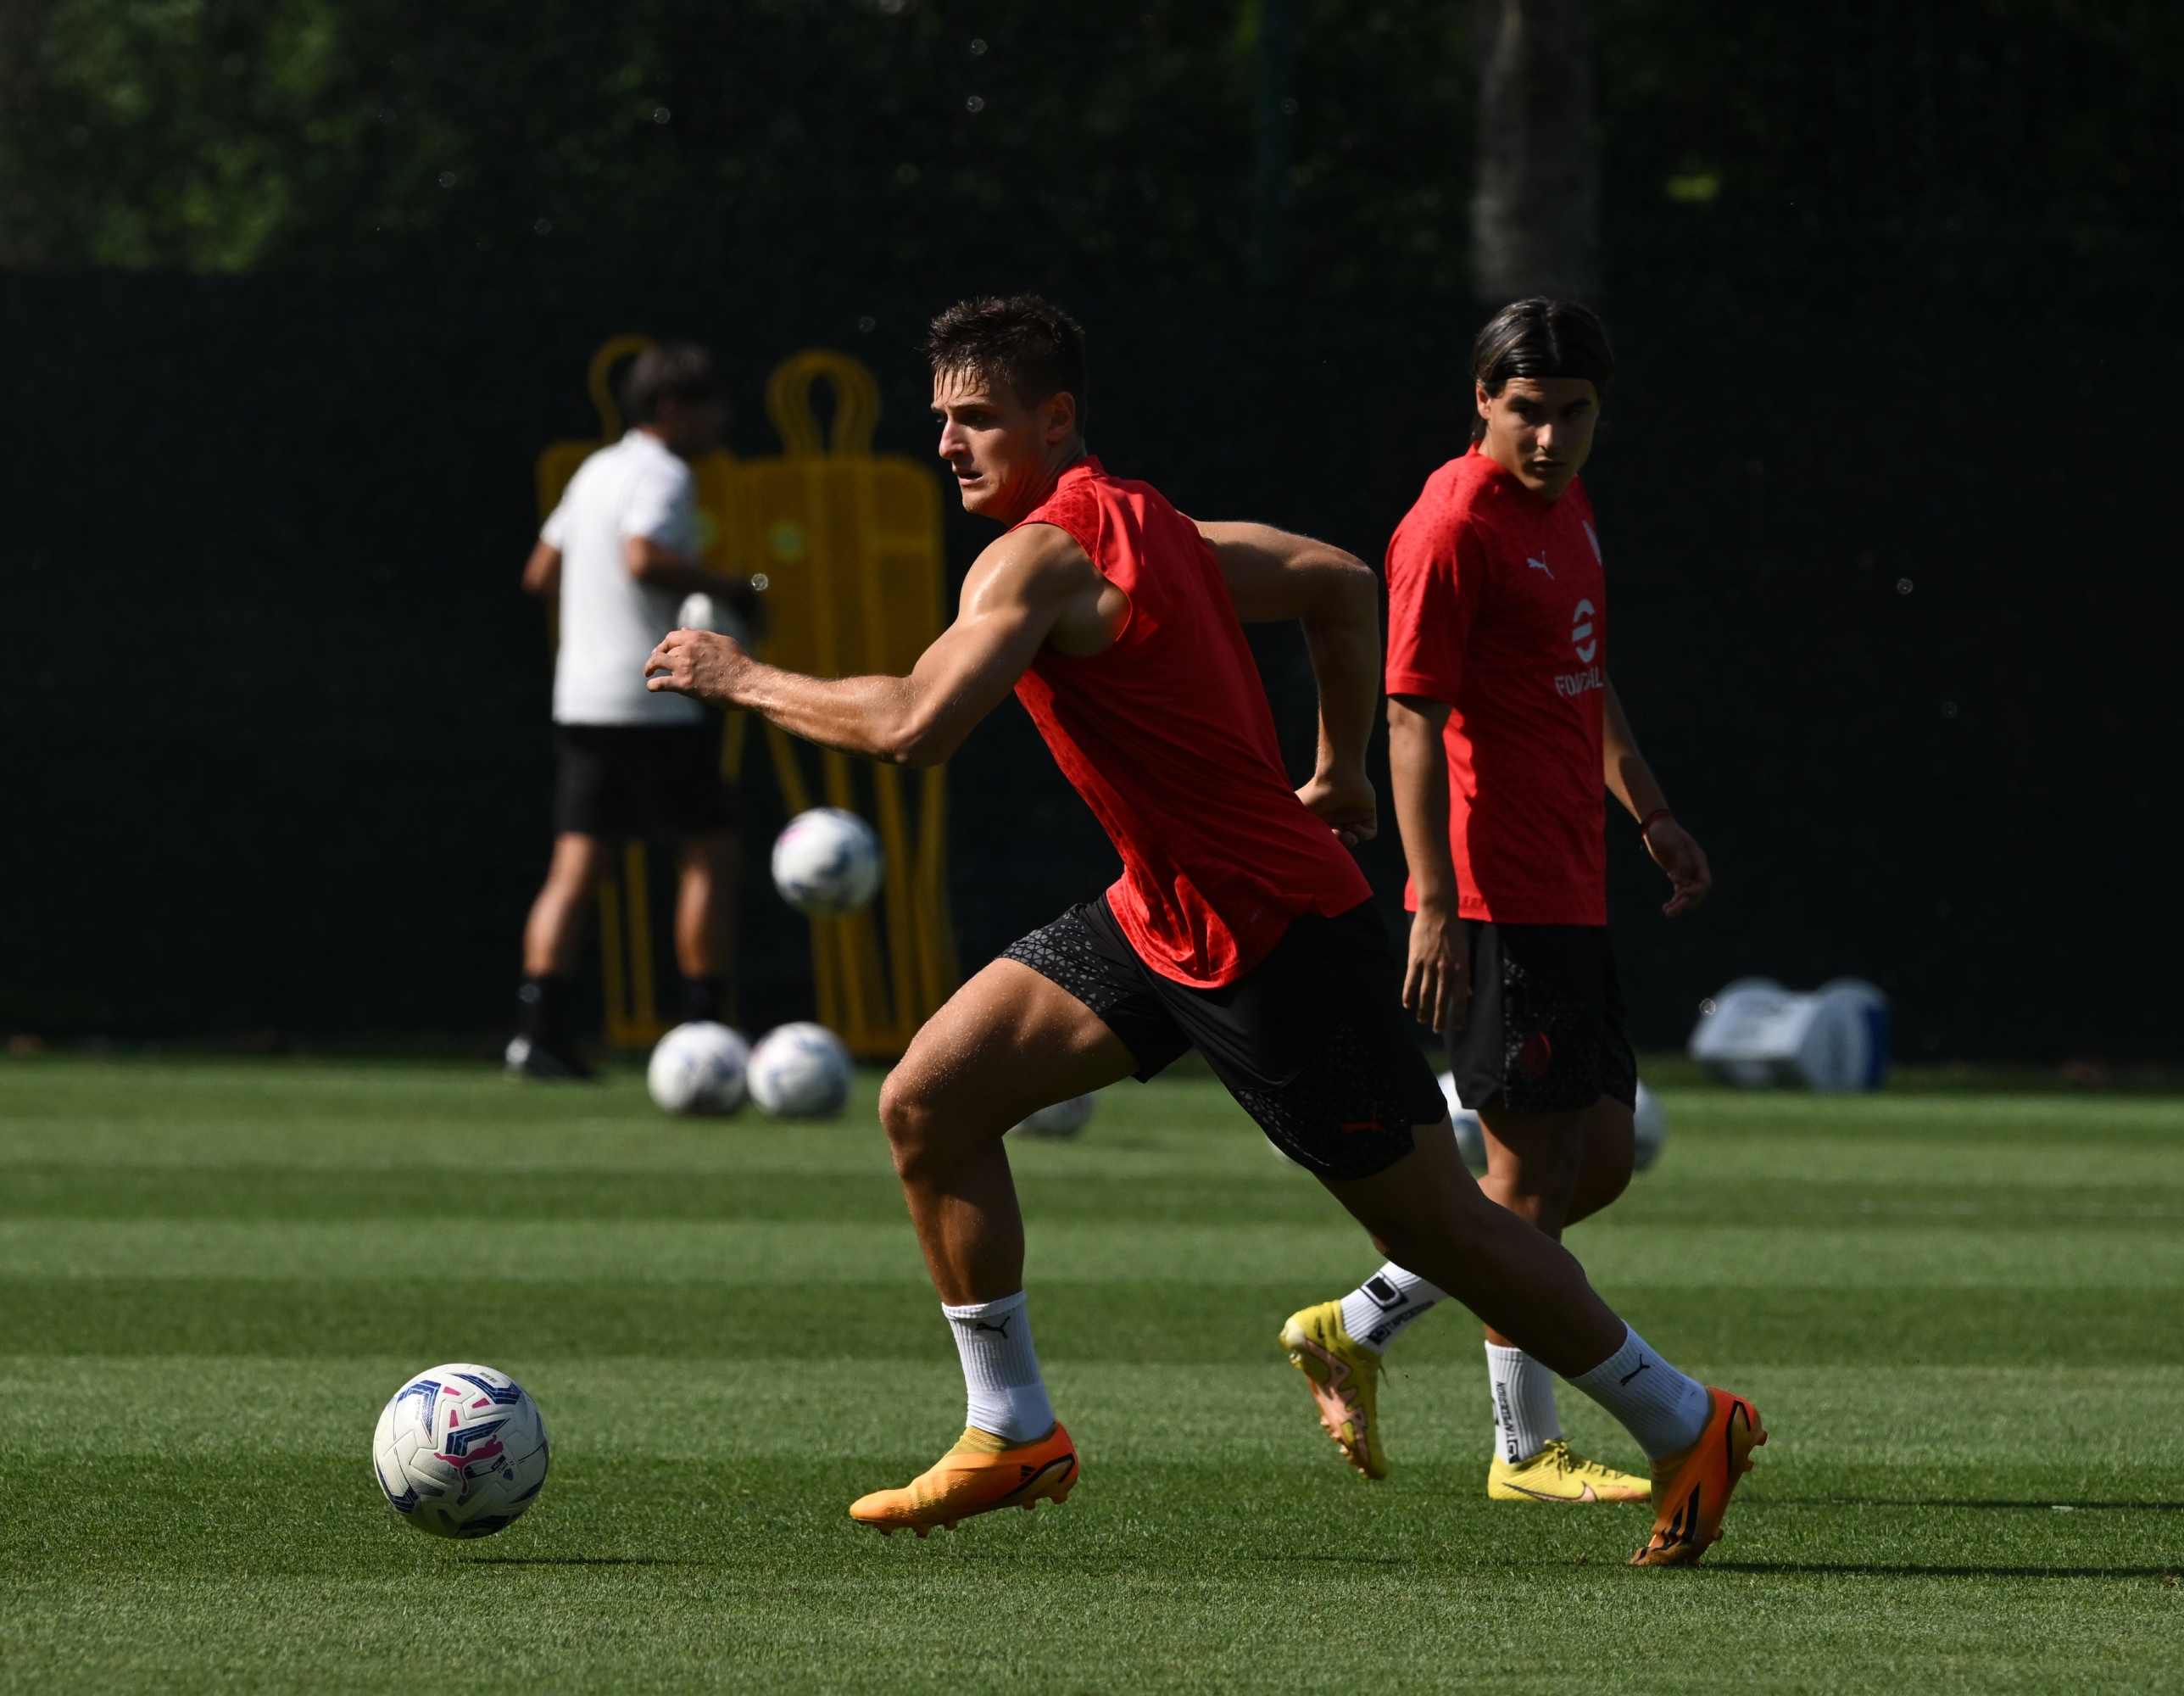 CAIRATE, ITALY - AUGUST 24: Lorenzo Colombo of AC Milan in action during AC Milan training session at Milanello on August 24, 2023 in Cairate, Italy. (Photo by Claudio Villa/AC Milan via Getty Images)